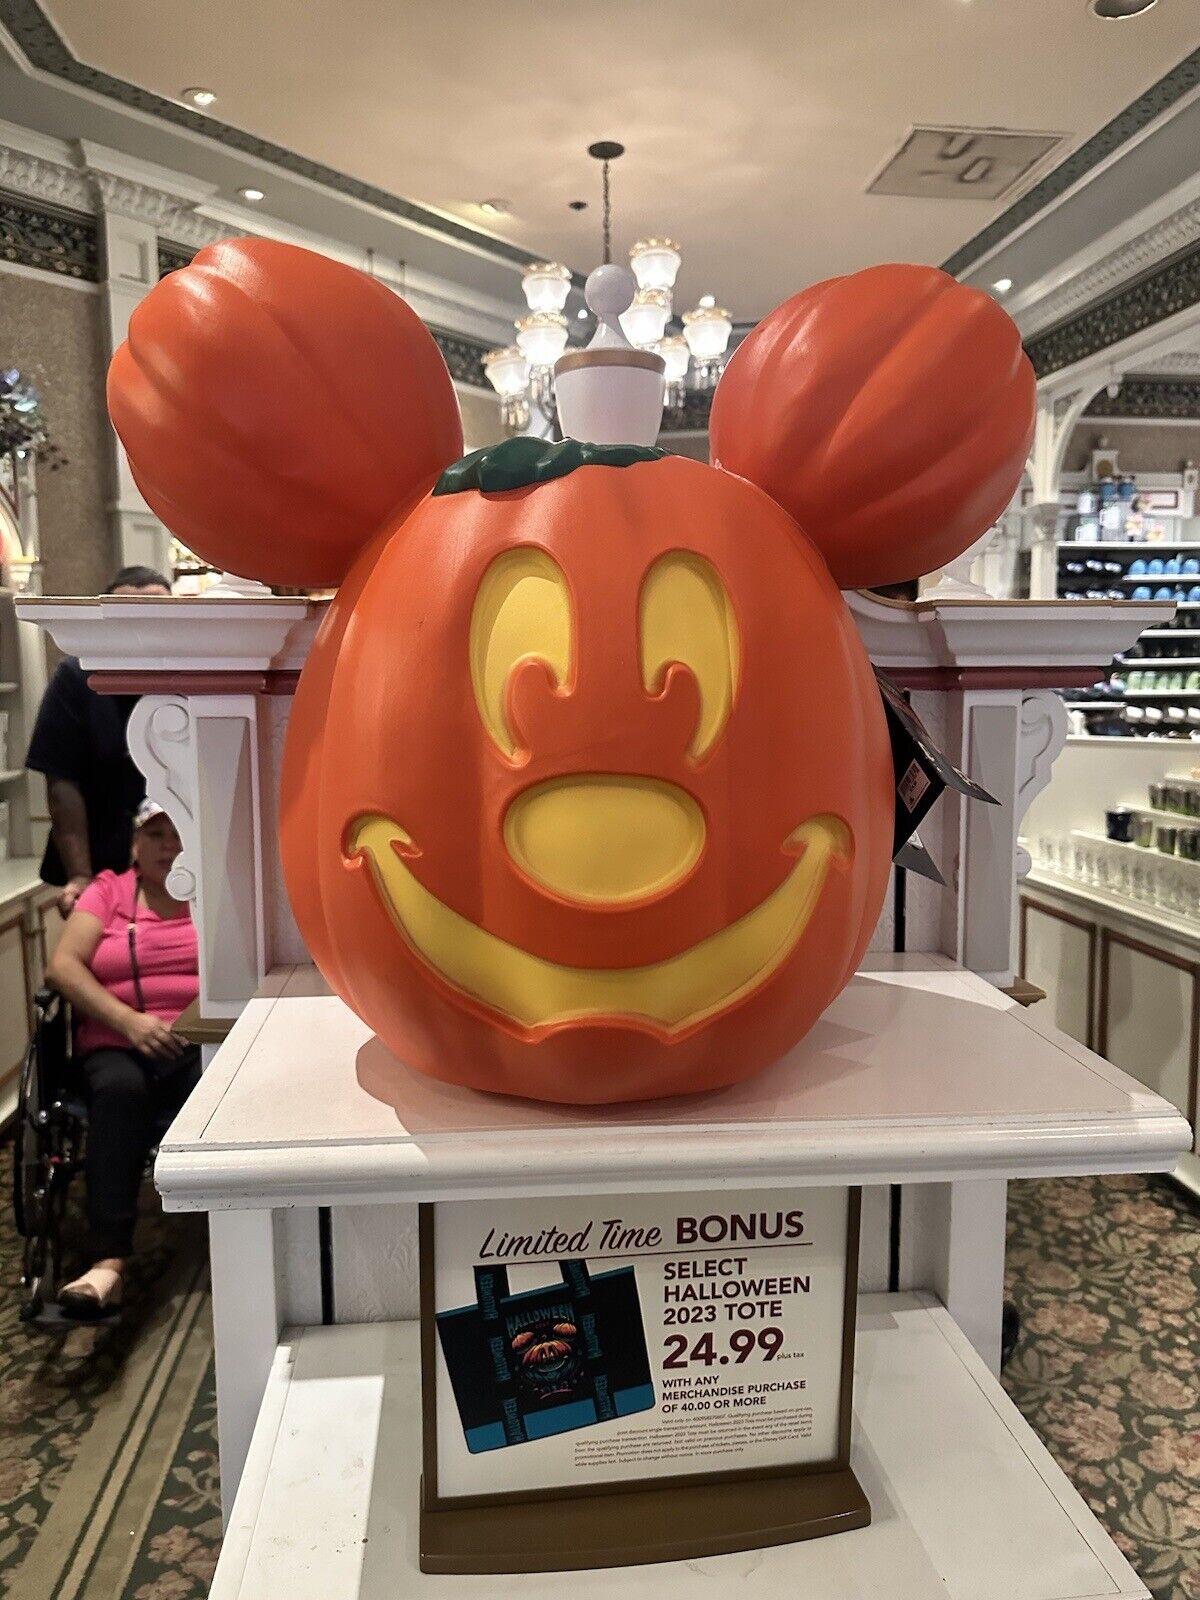 Disney Parks Giant Mickey Mouse Light Up Pumpkin Jack-O-Lantern - IN HAND